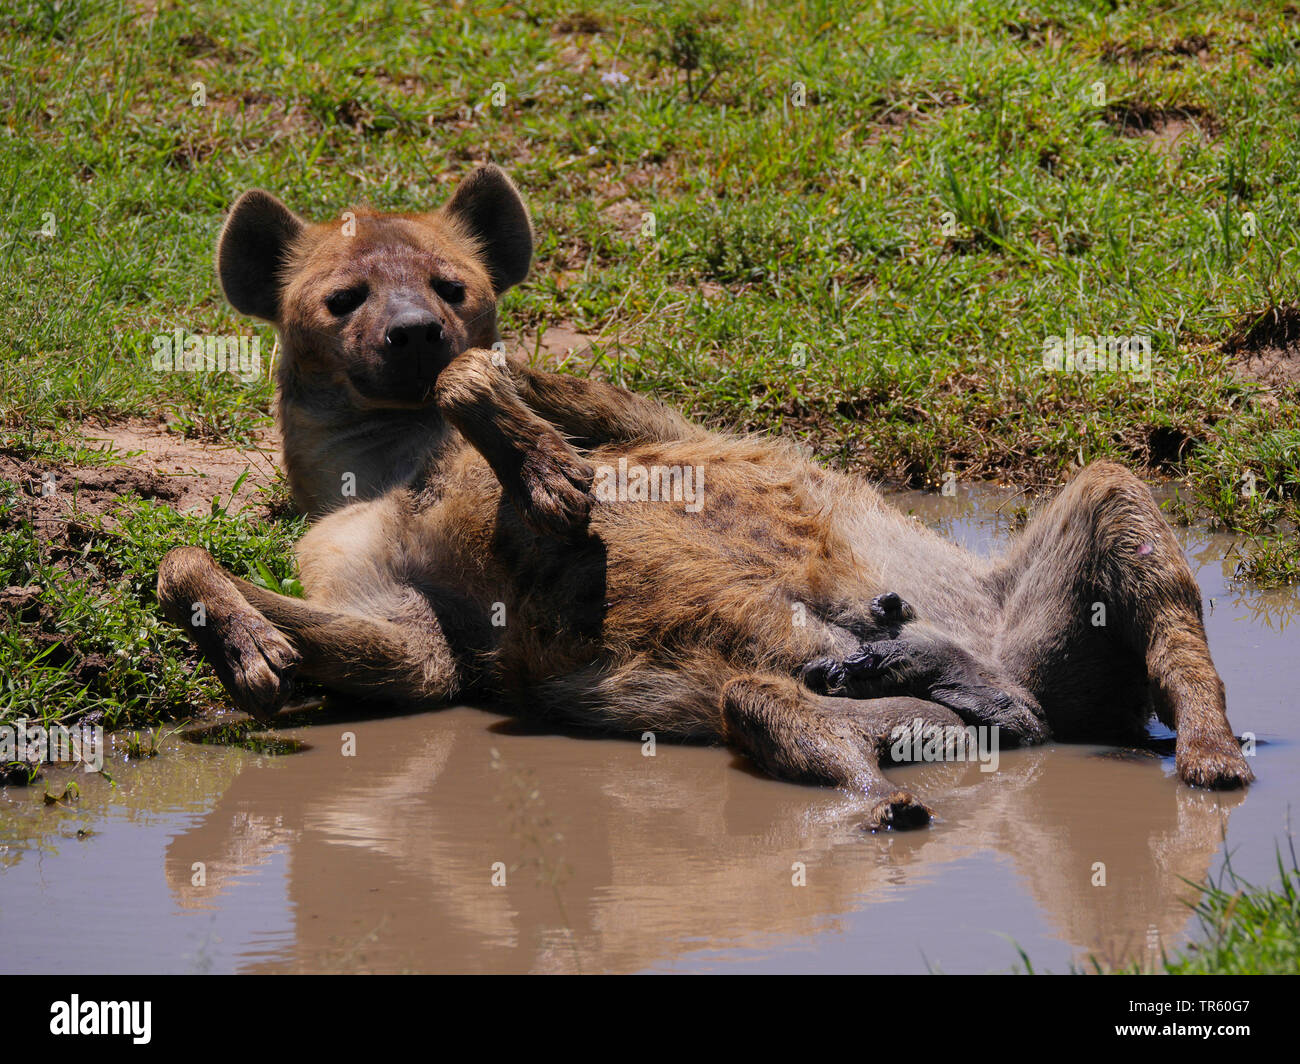 spotted hyena (Crocuta crocuta), lying relaxed in supine position in a puddle, Kenya, Masai Mara National Park Stock Photo